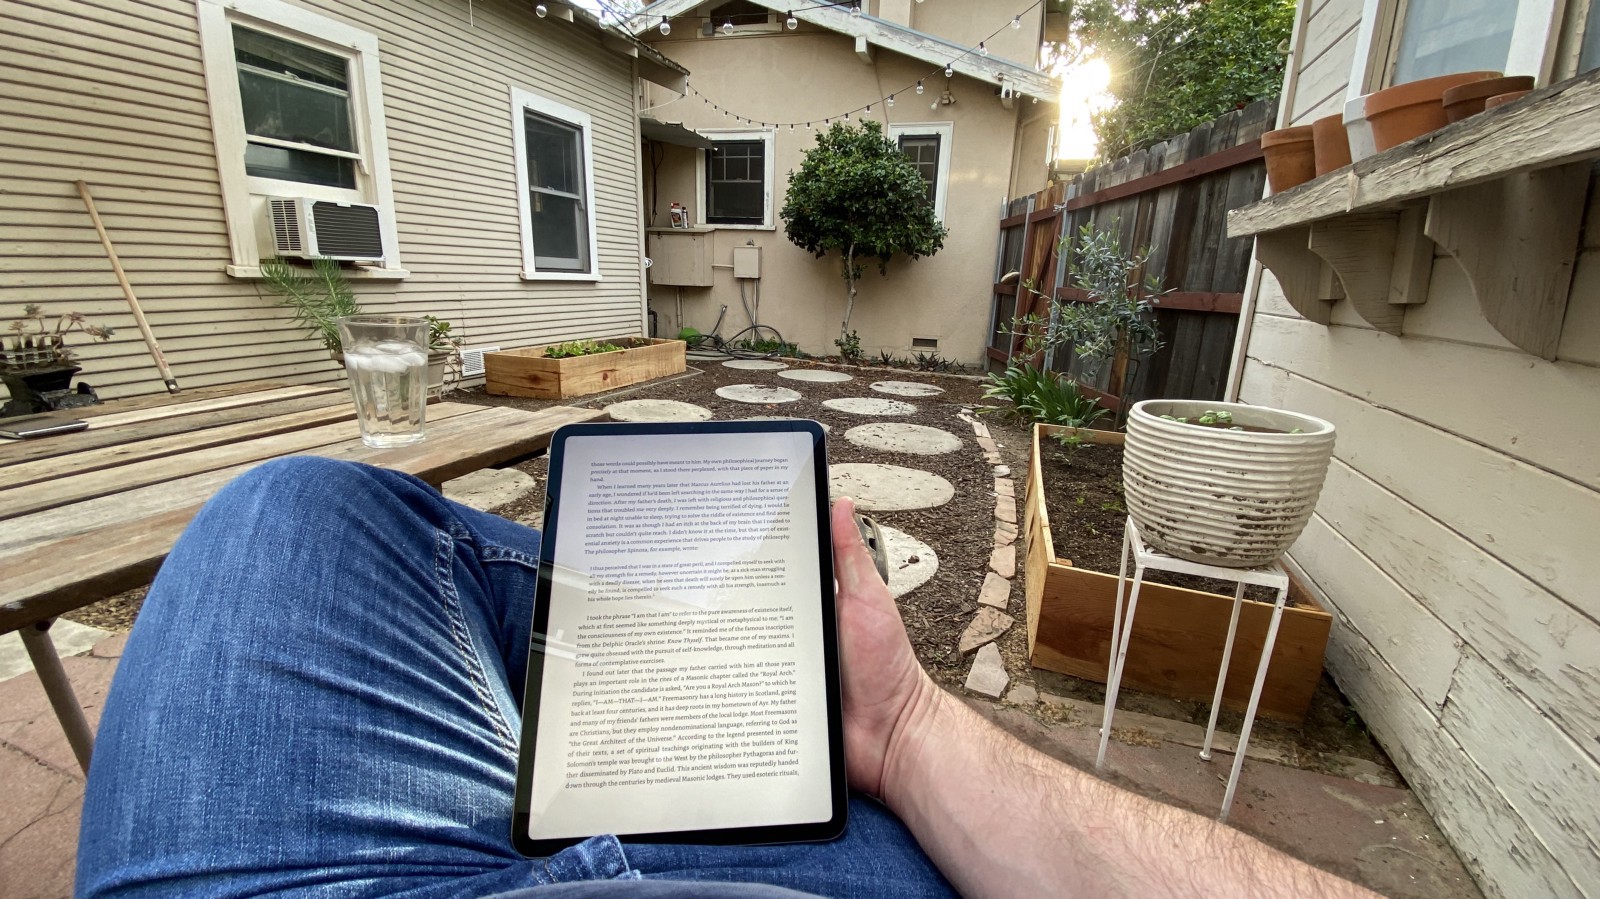 iPad Pro 11-inch using the Kindle App outside